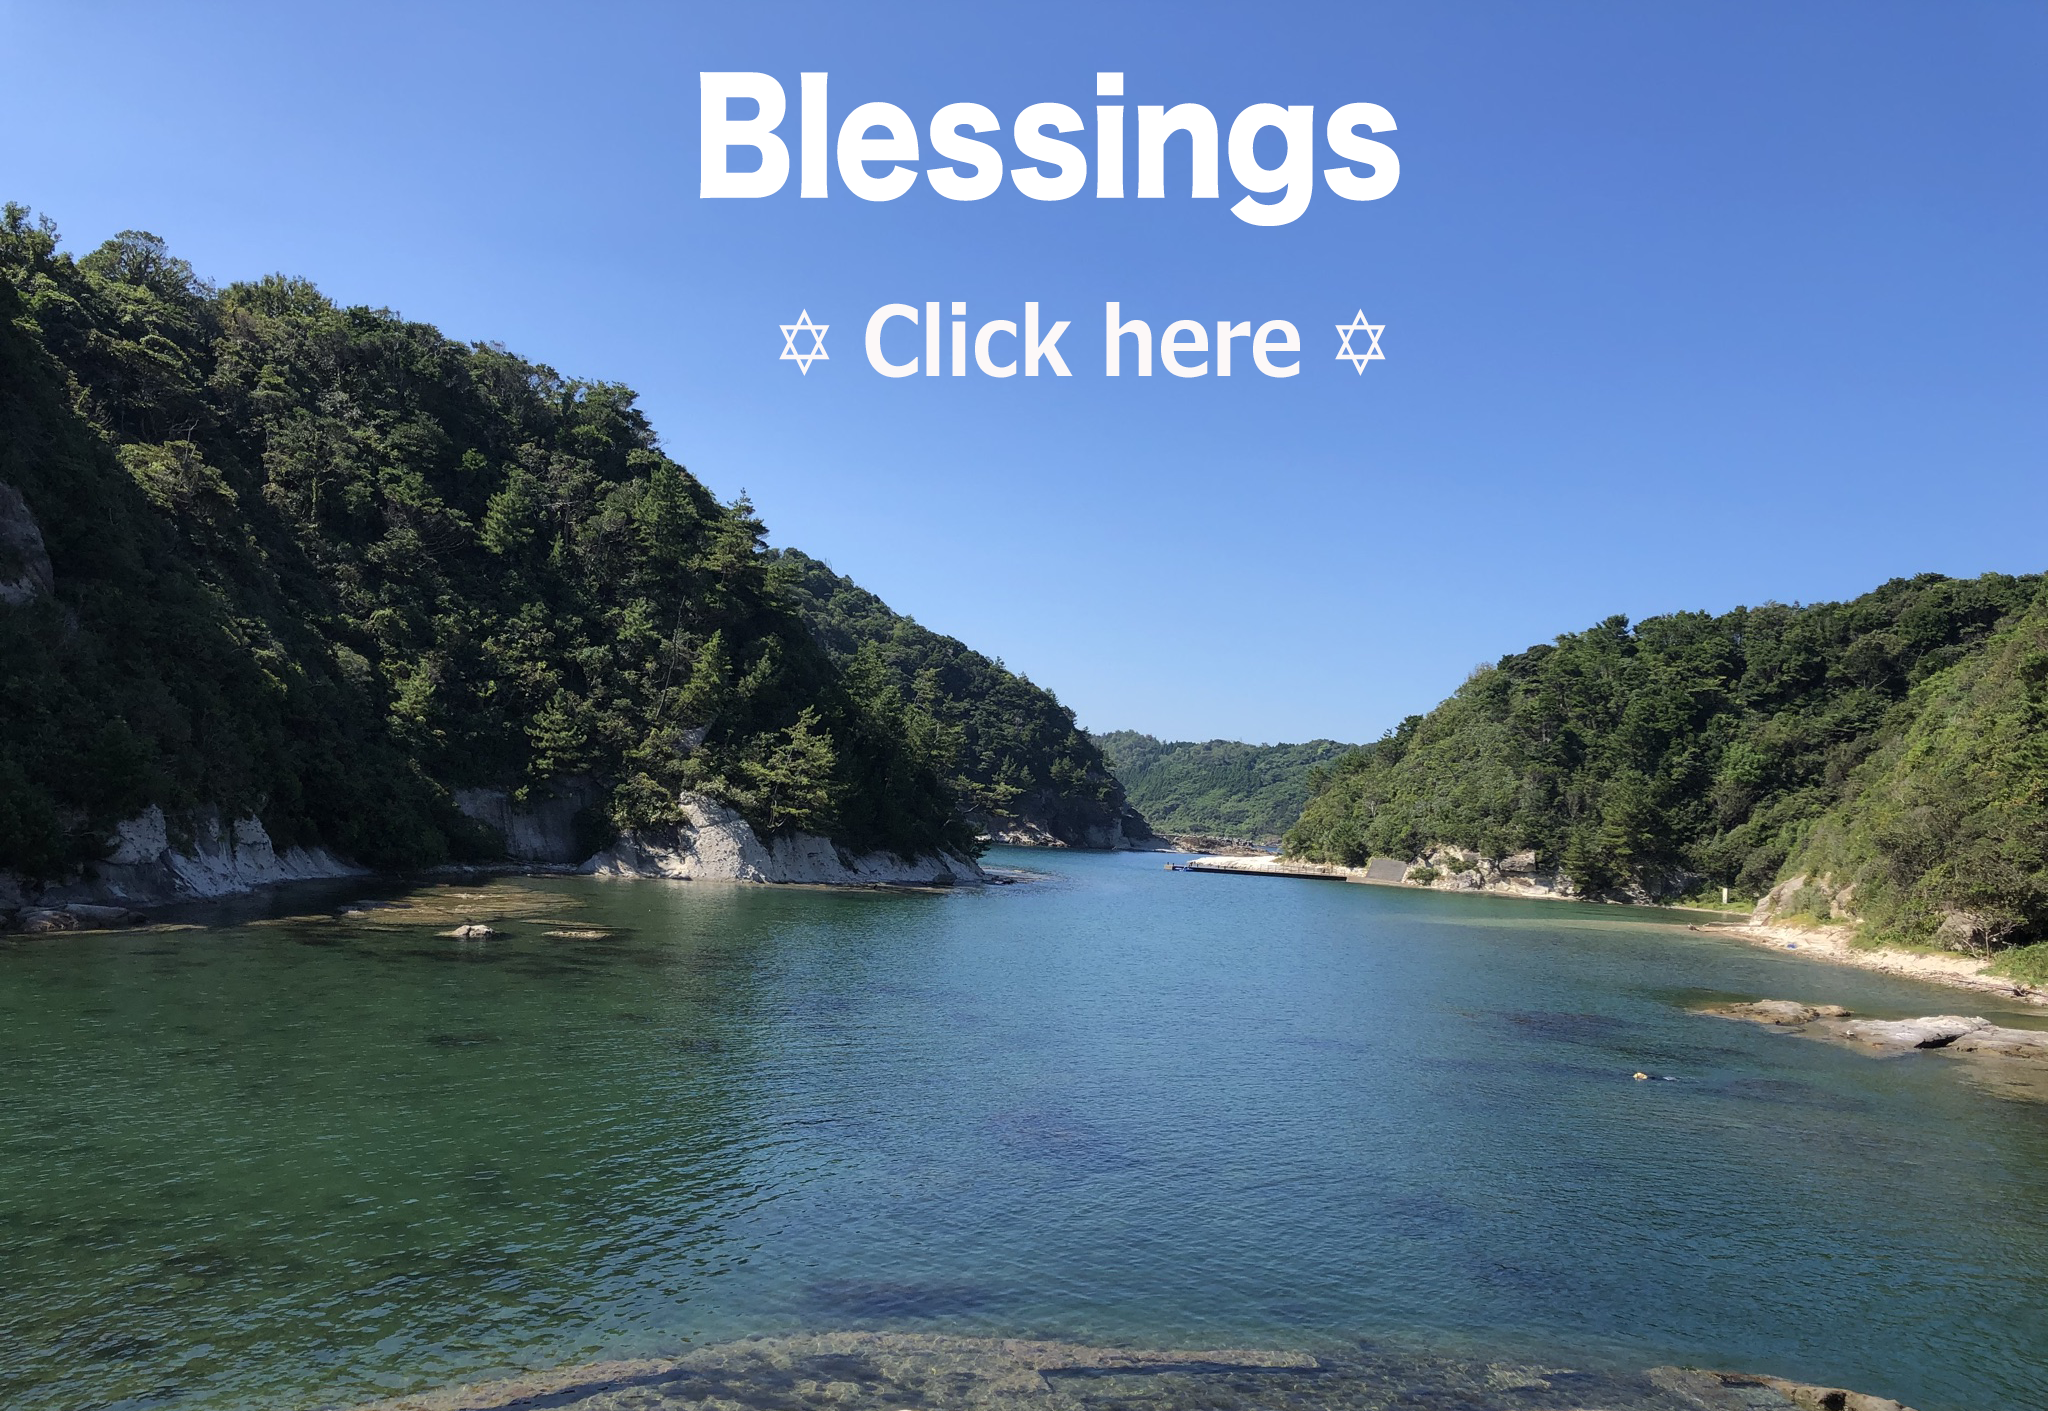 Blessings in the Sea